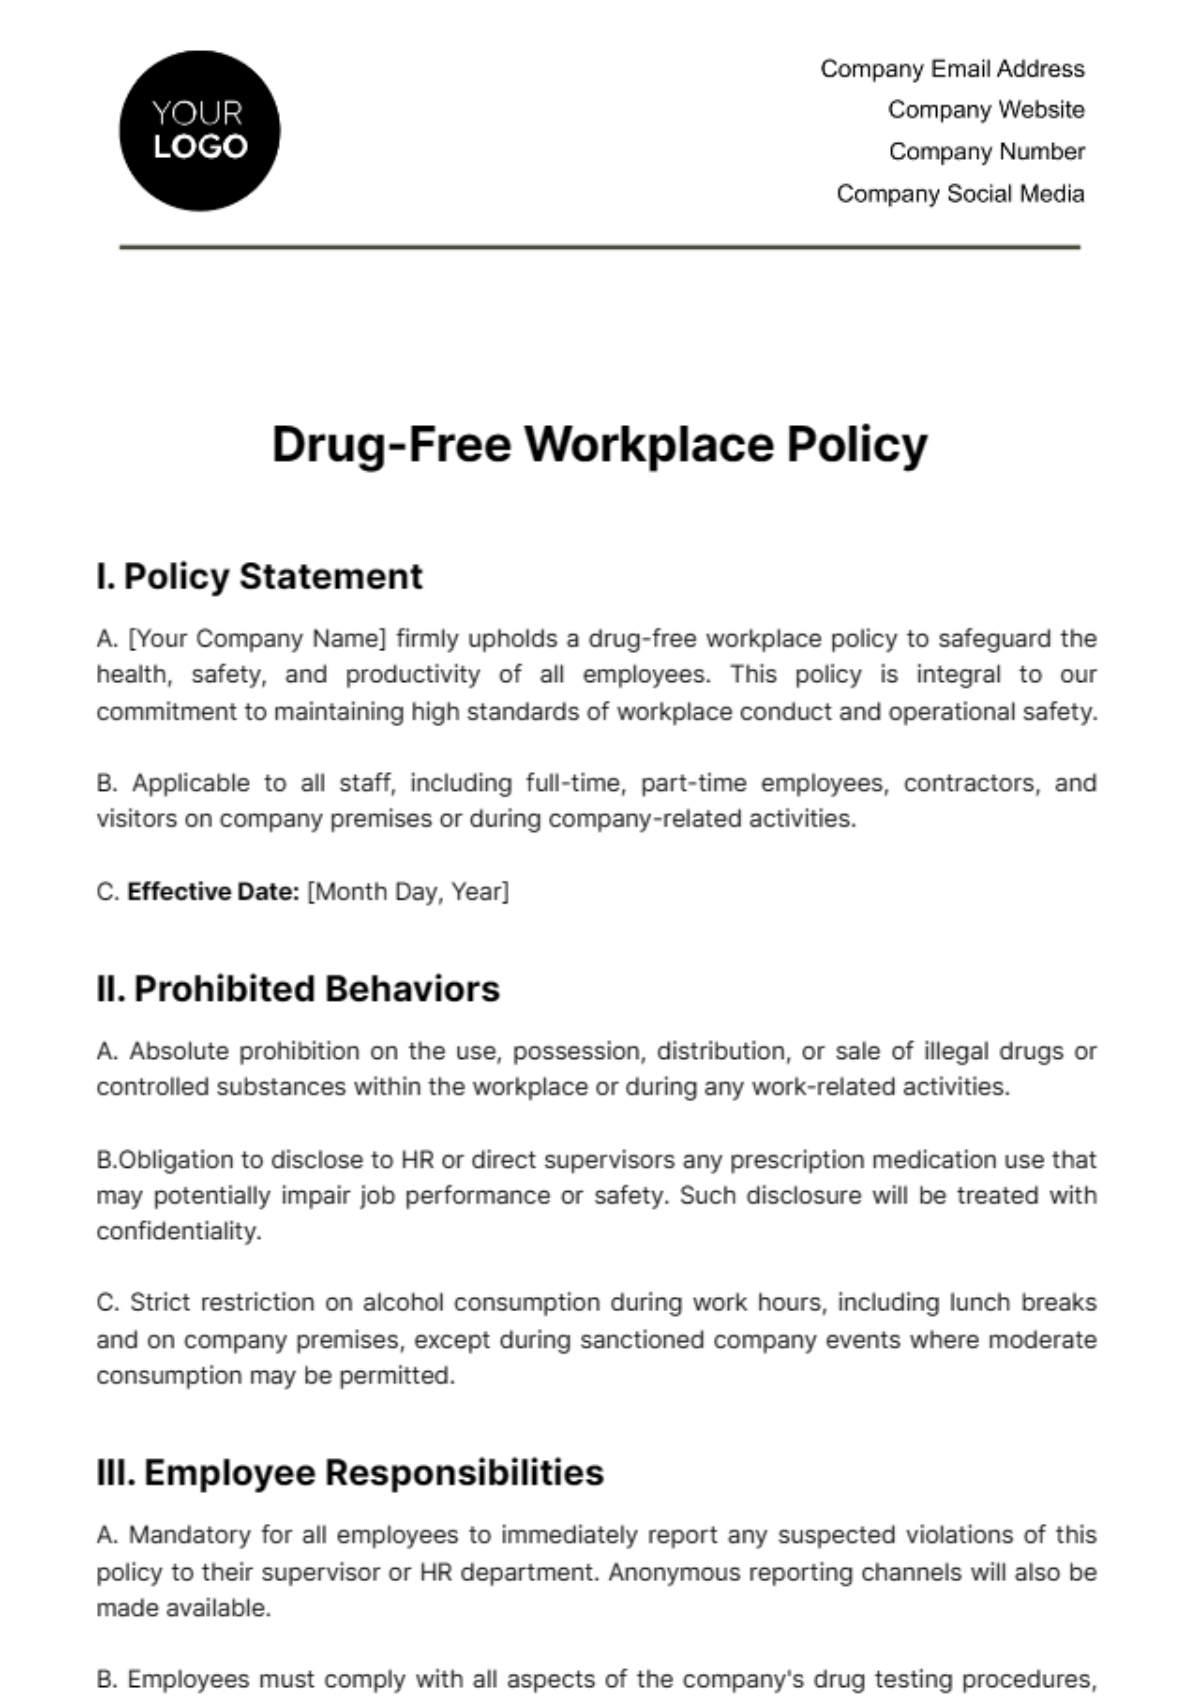 Drug-Free Workplace Policy Template